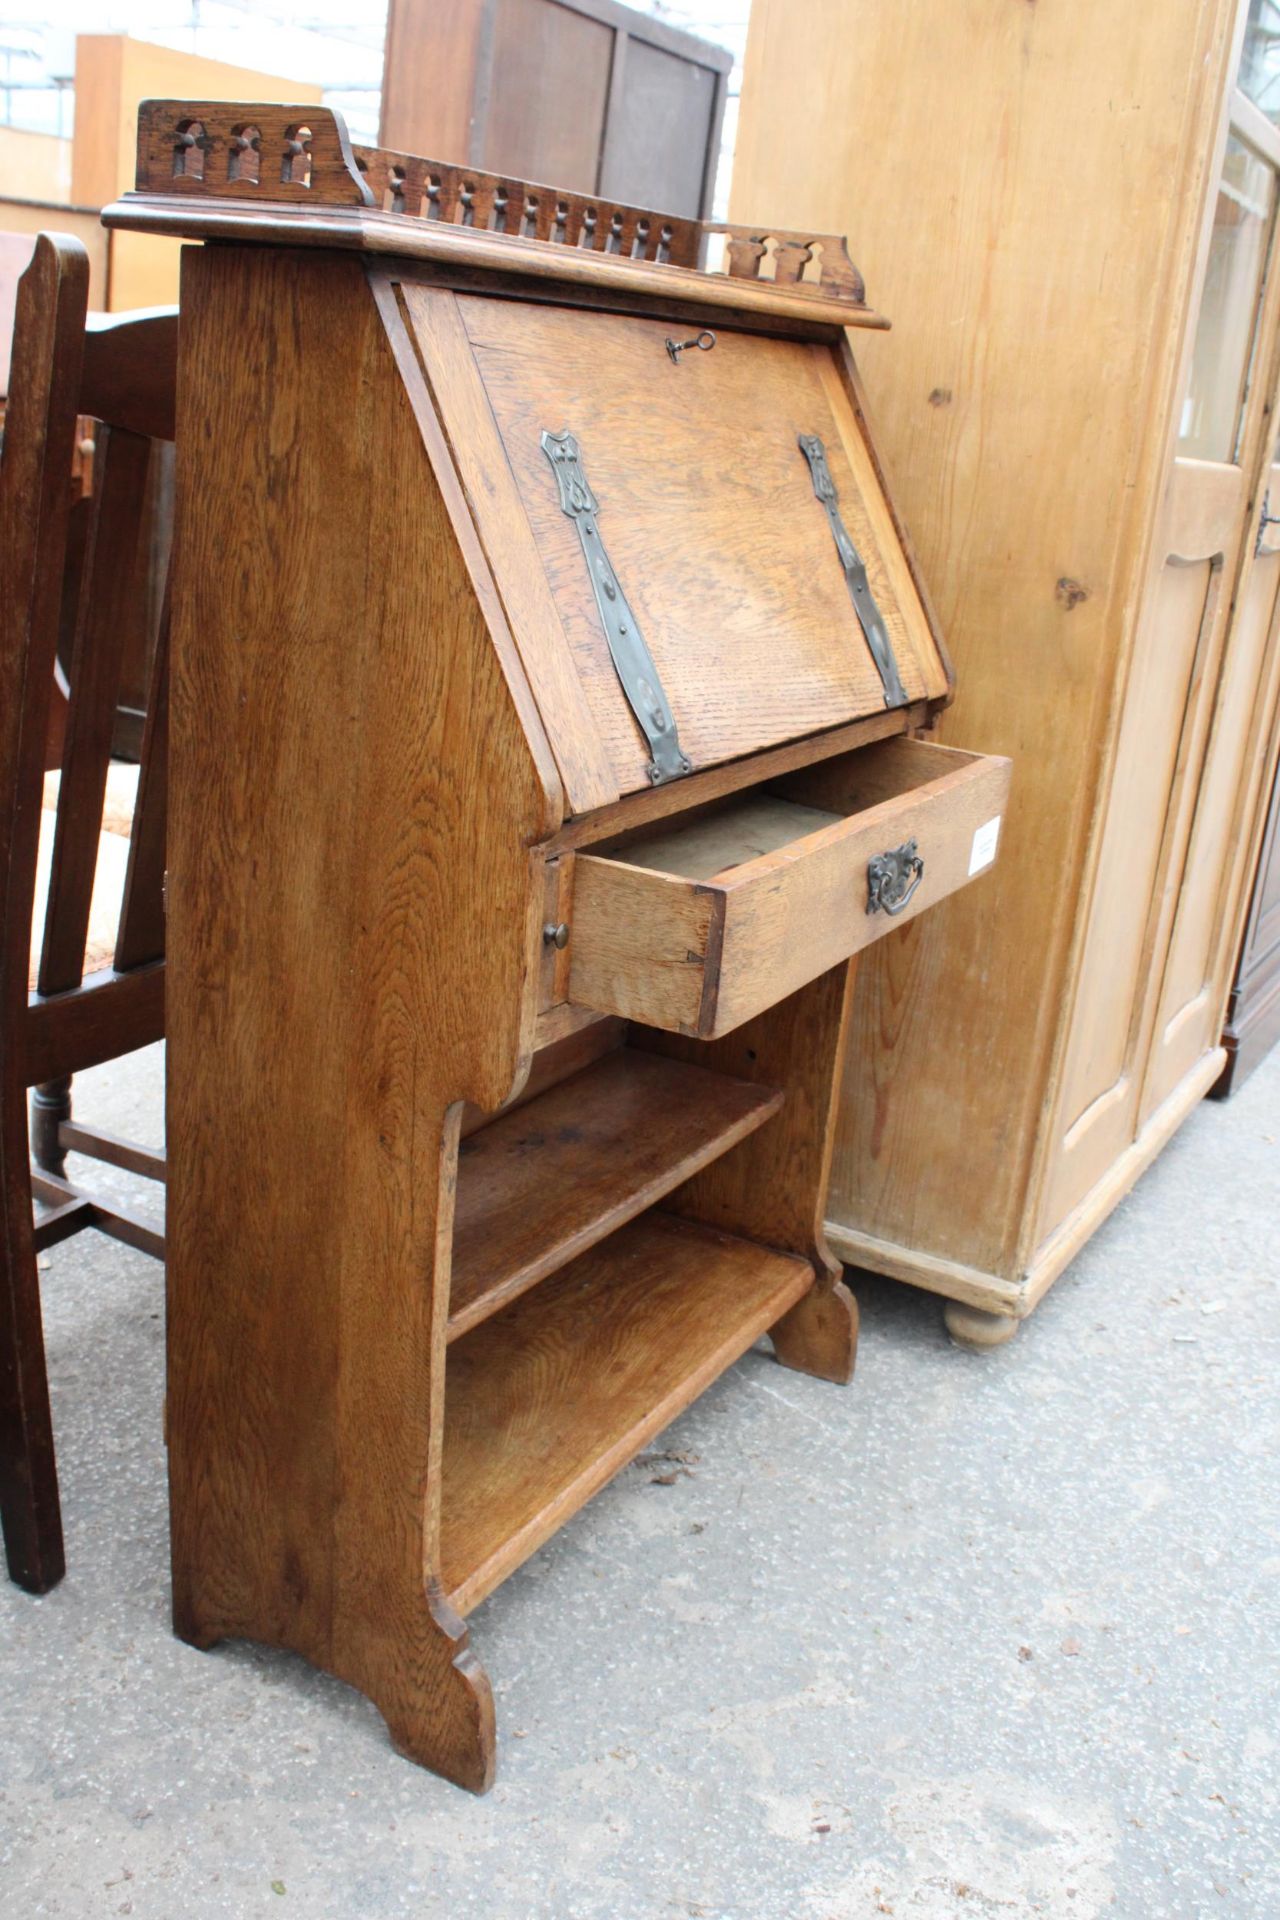 AN OAK ARTS AND CRAFTS BUREAU WITH GALLERY BACK AND OPEN BASE, 30" WIDE - Image 4 of 4